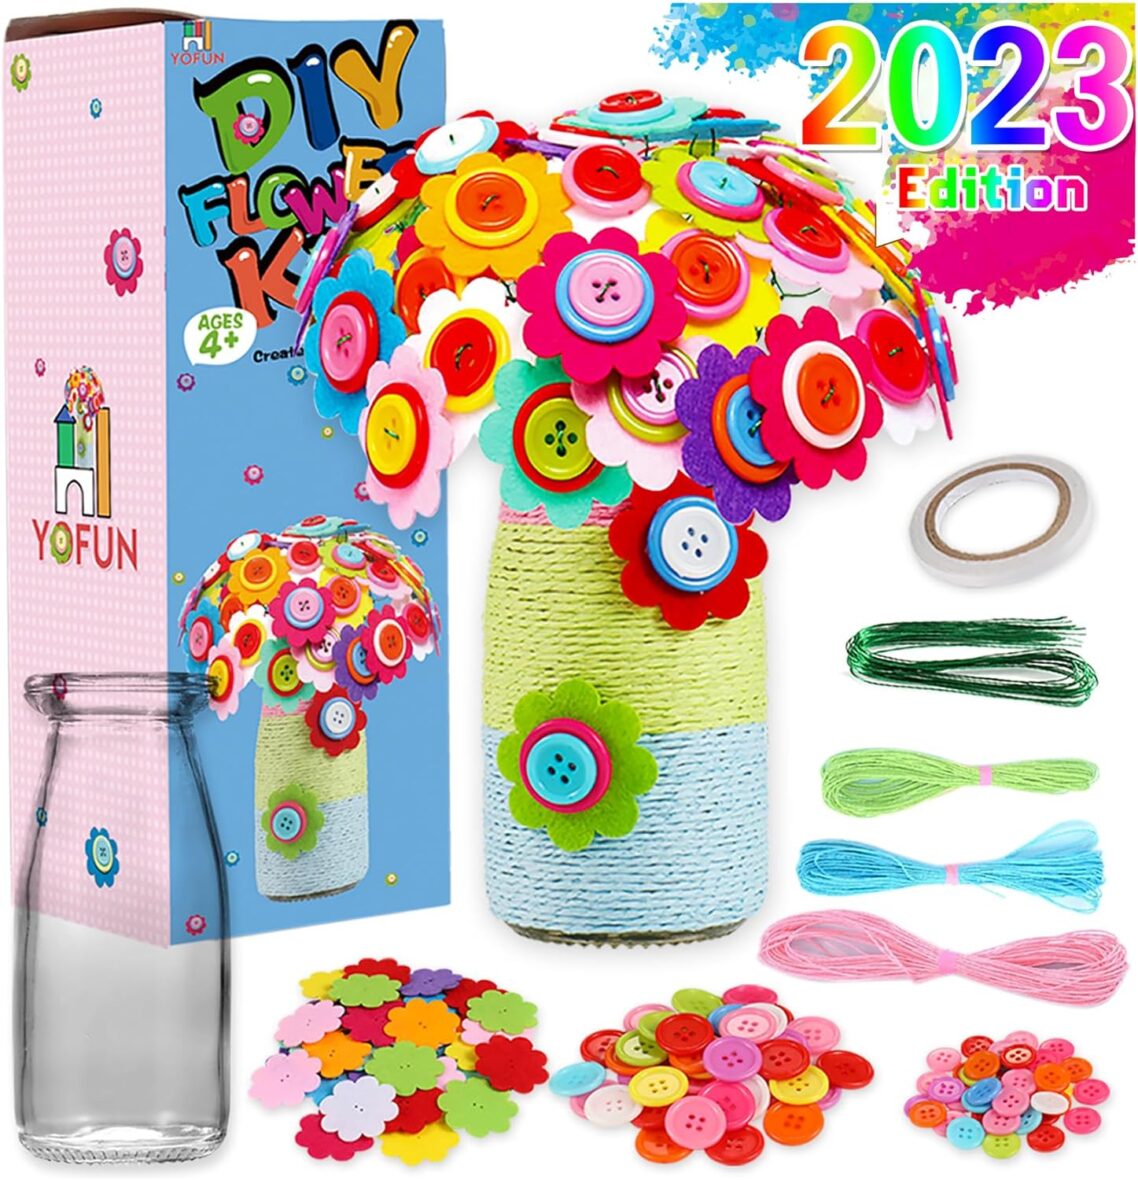 DIY Flower Craft Kit for Kids – Make Your Own Flower Bouquet with Buttons and Felt Flowers, Vase Art Toy & Craft Project for Children